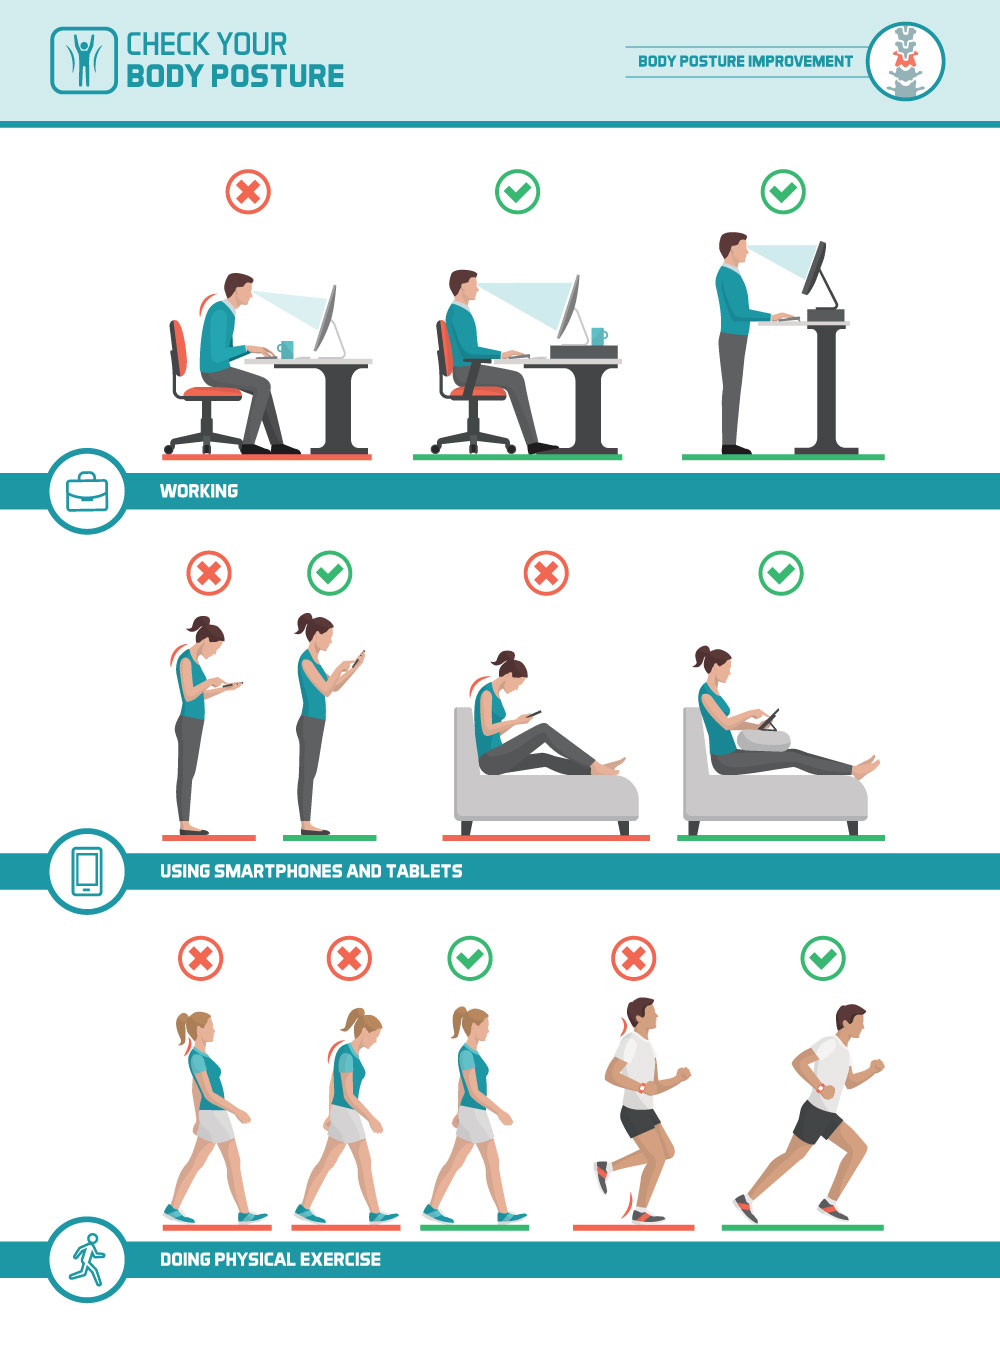 How to improve posture: 6 products to help improve your posture